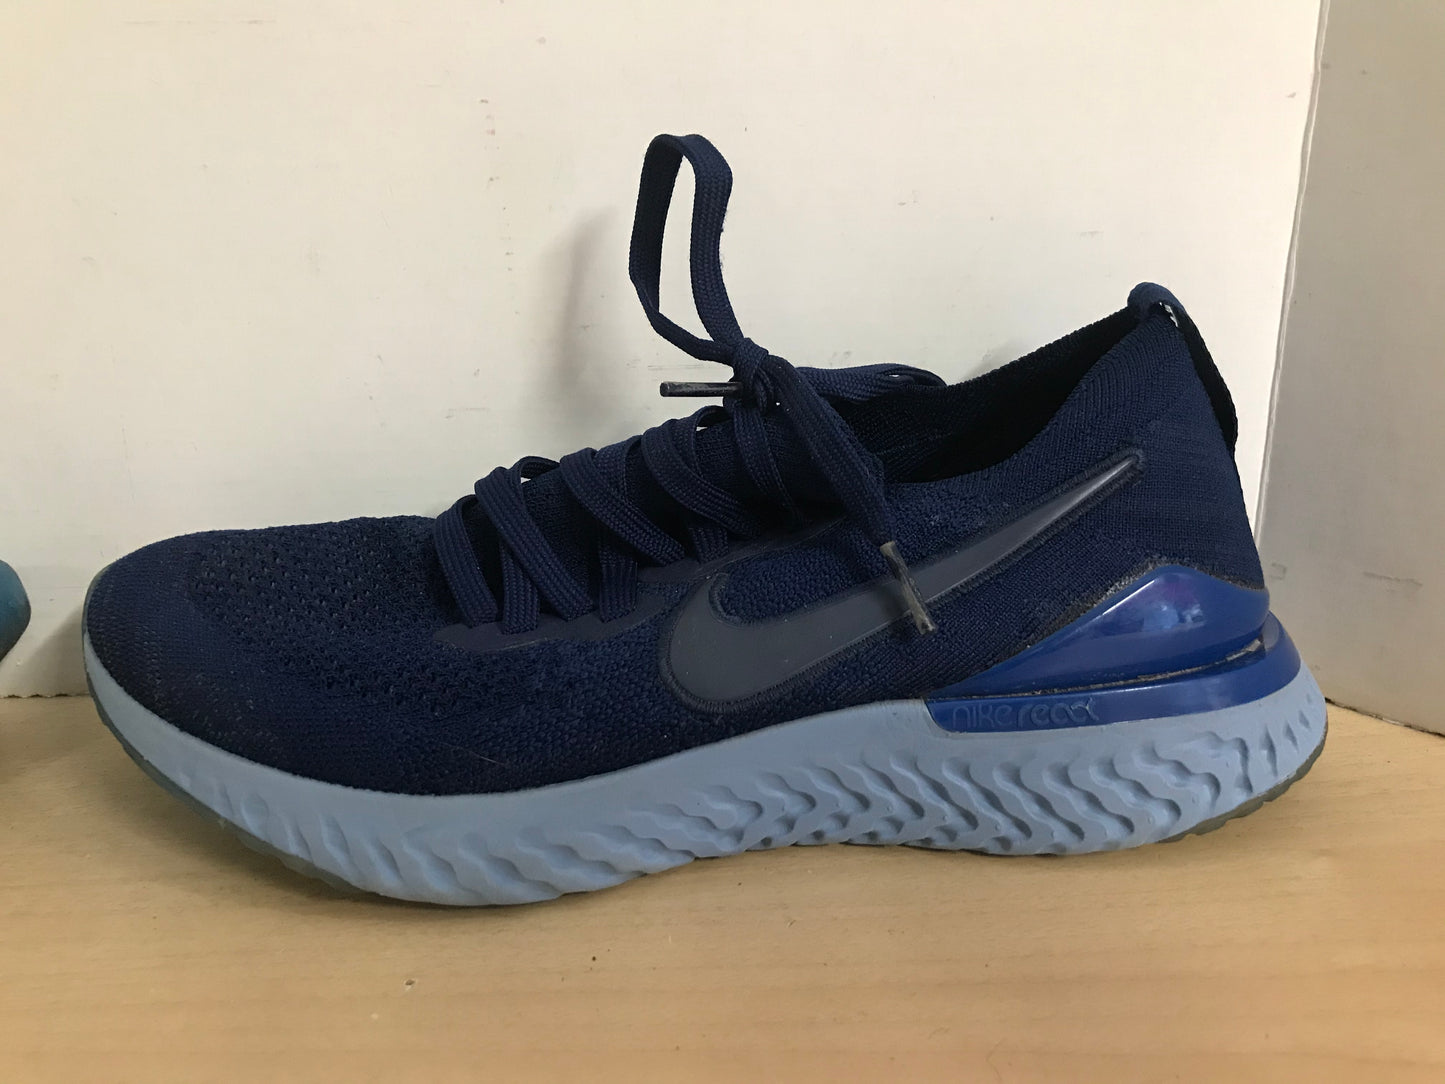 Runners Ladies Size 7 Nike Blue Excellent